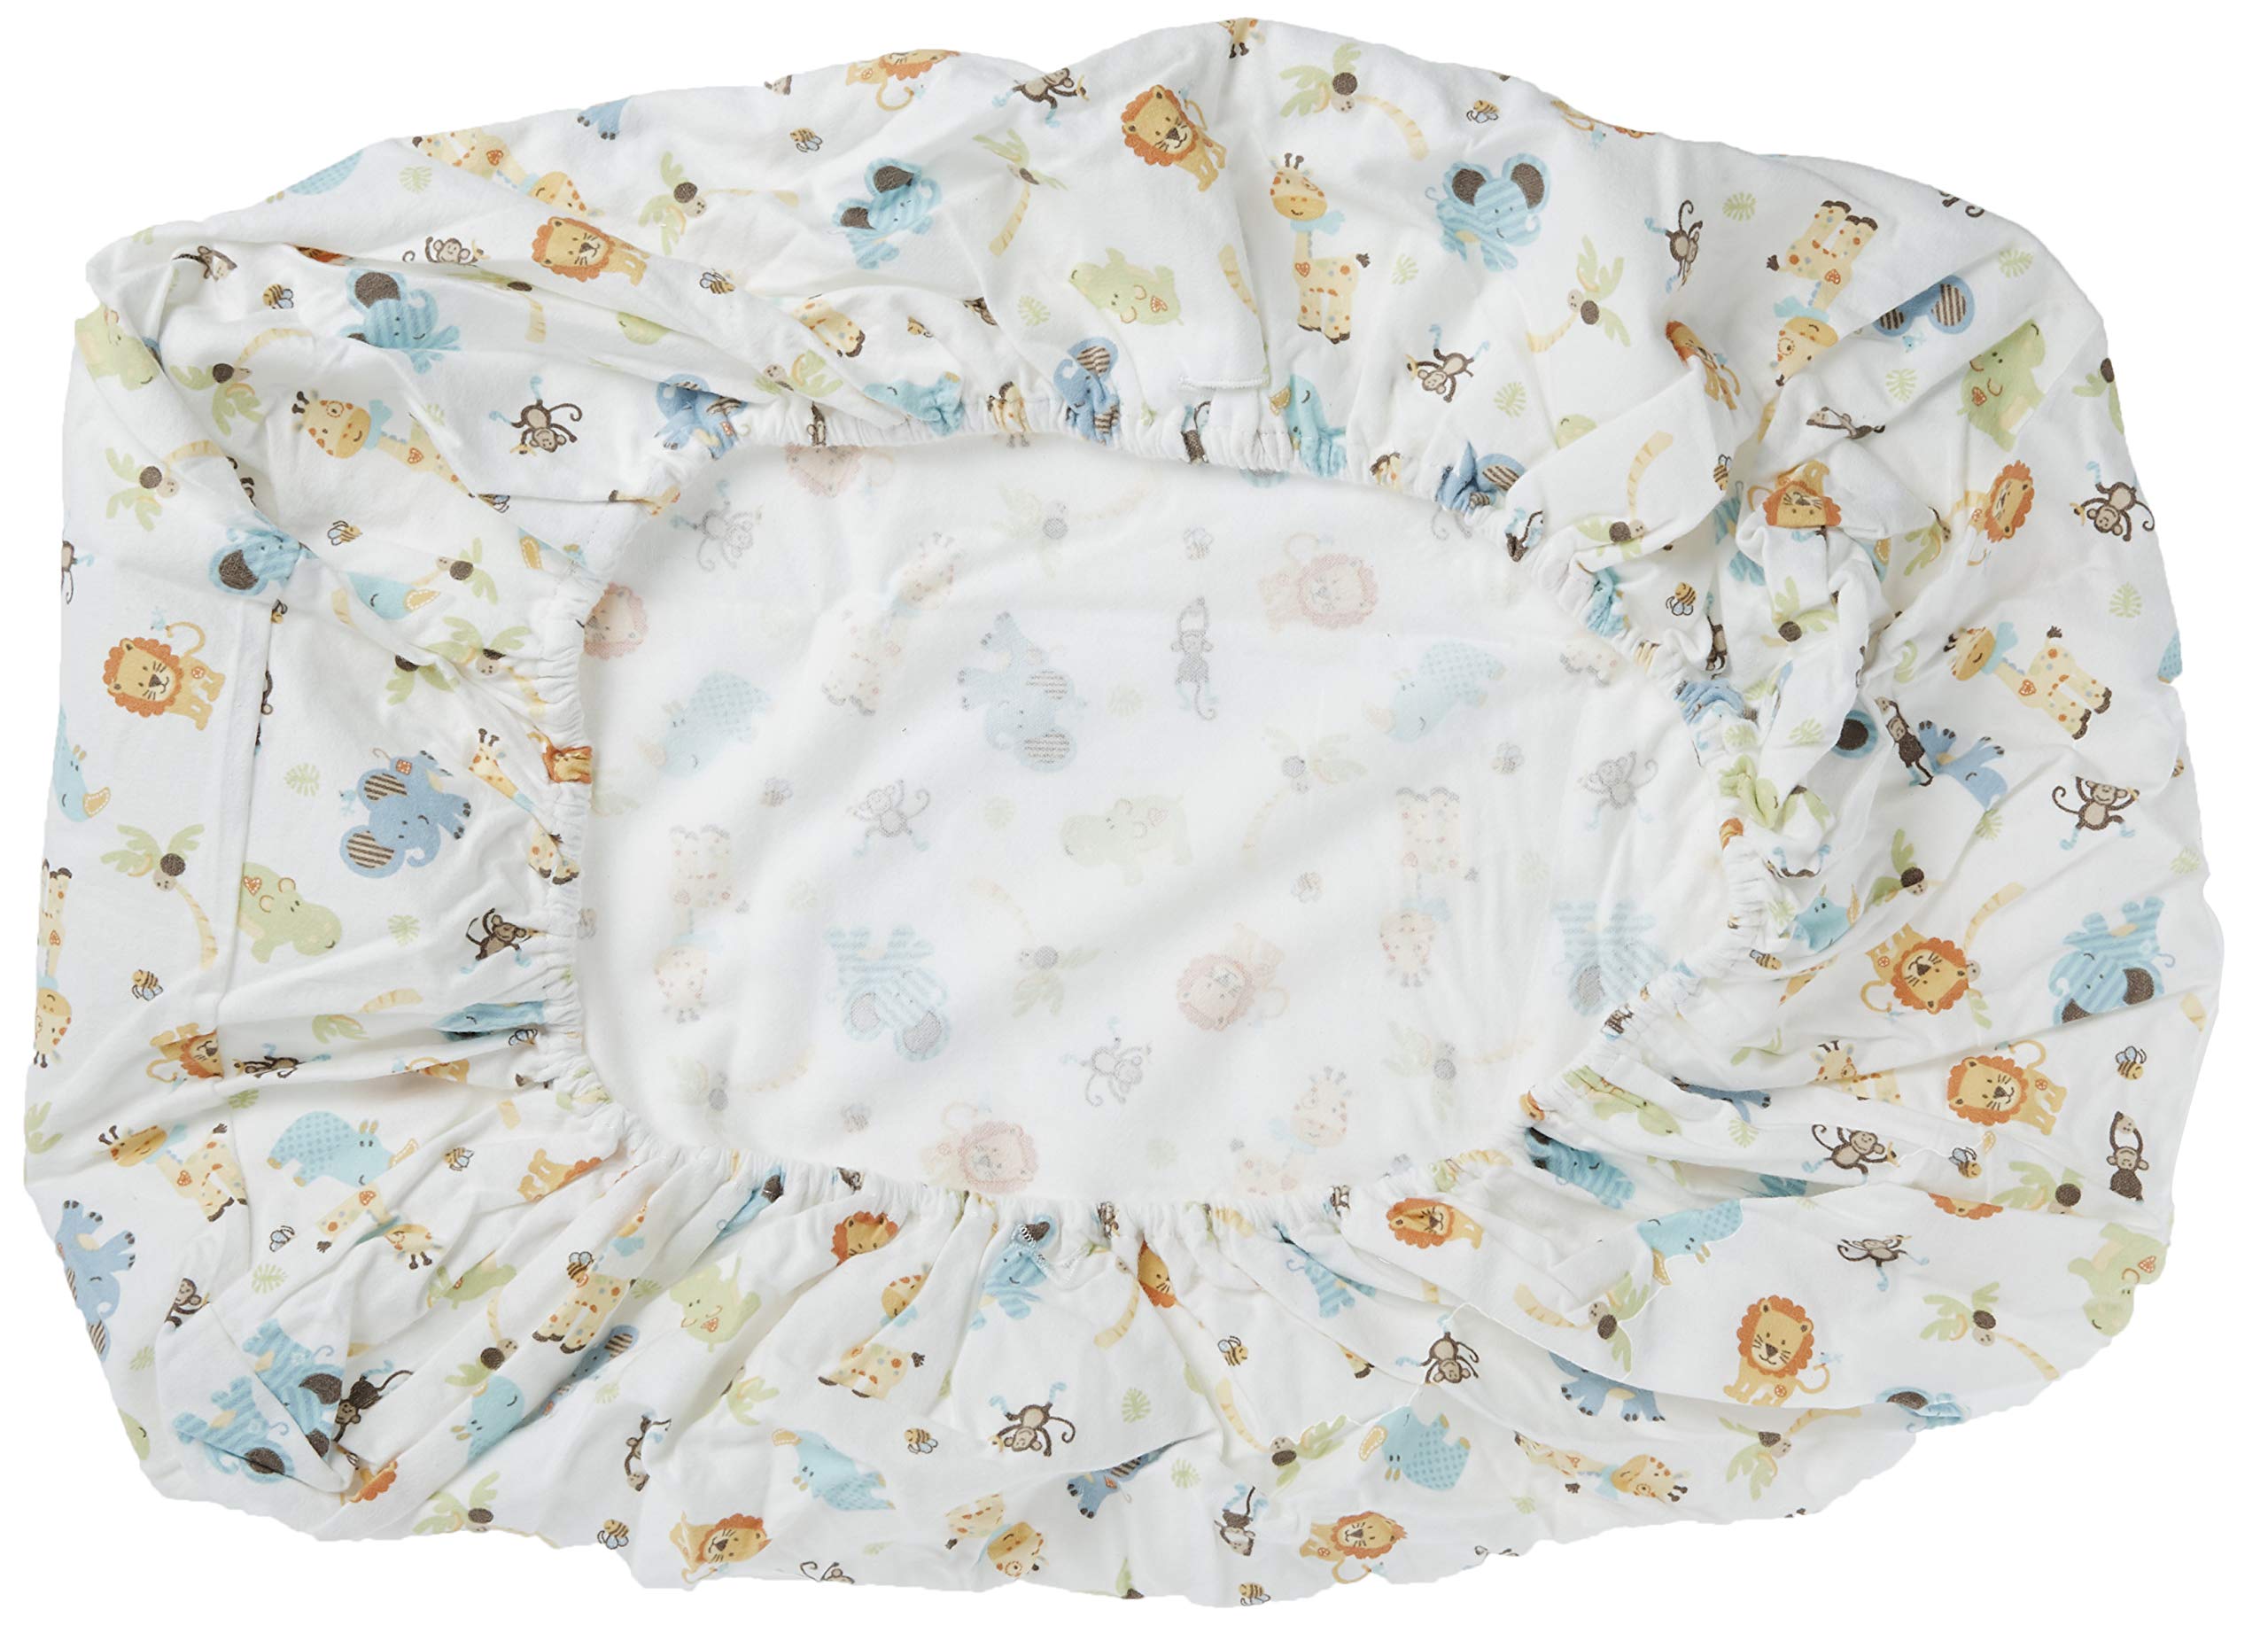 Trend Lab Jungle Friends Deluxe Flannel Changing Pad Cover, 32x16 Inch (Pack of 1)